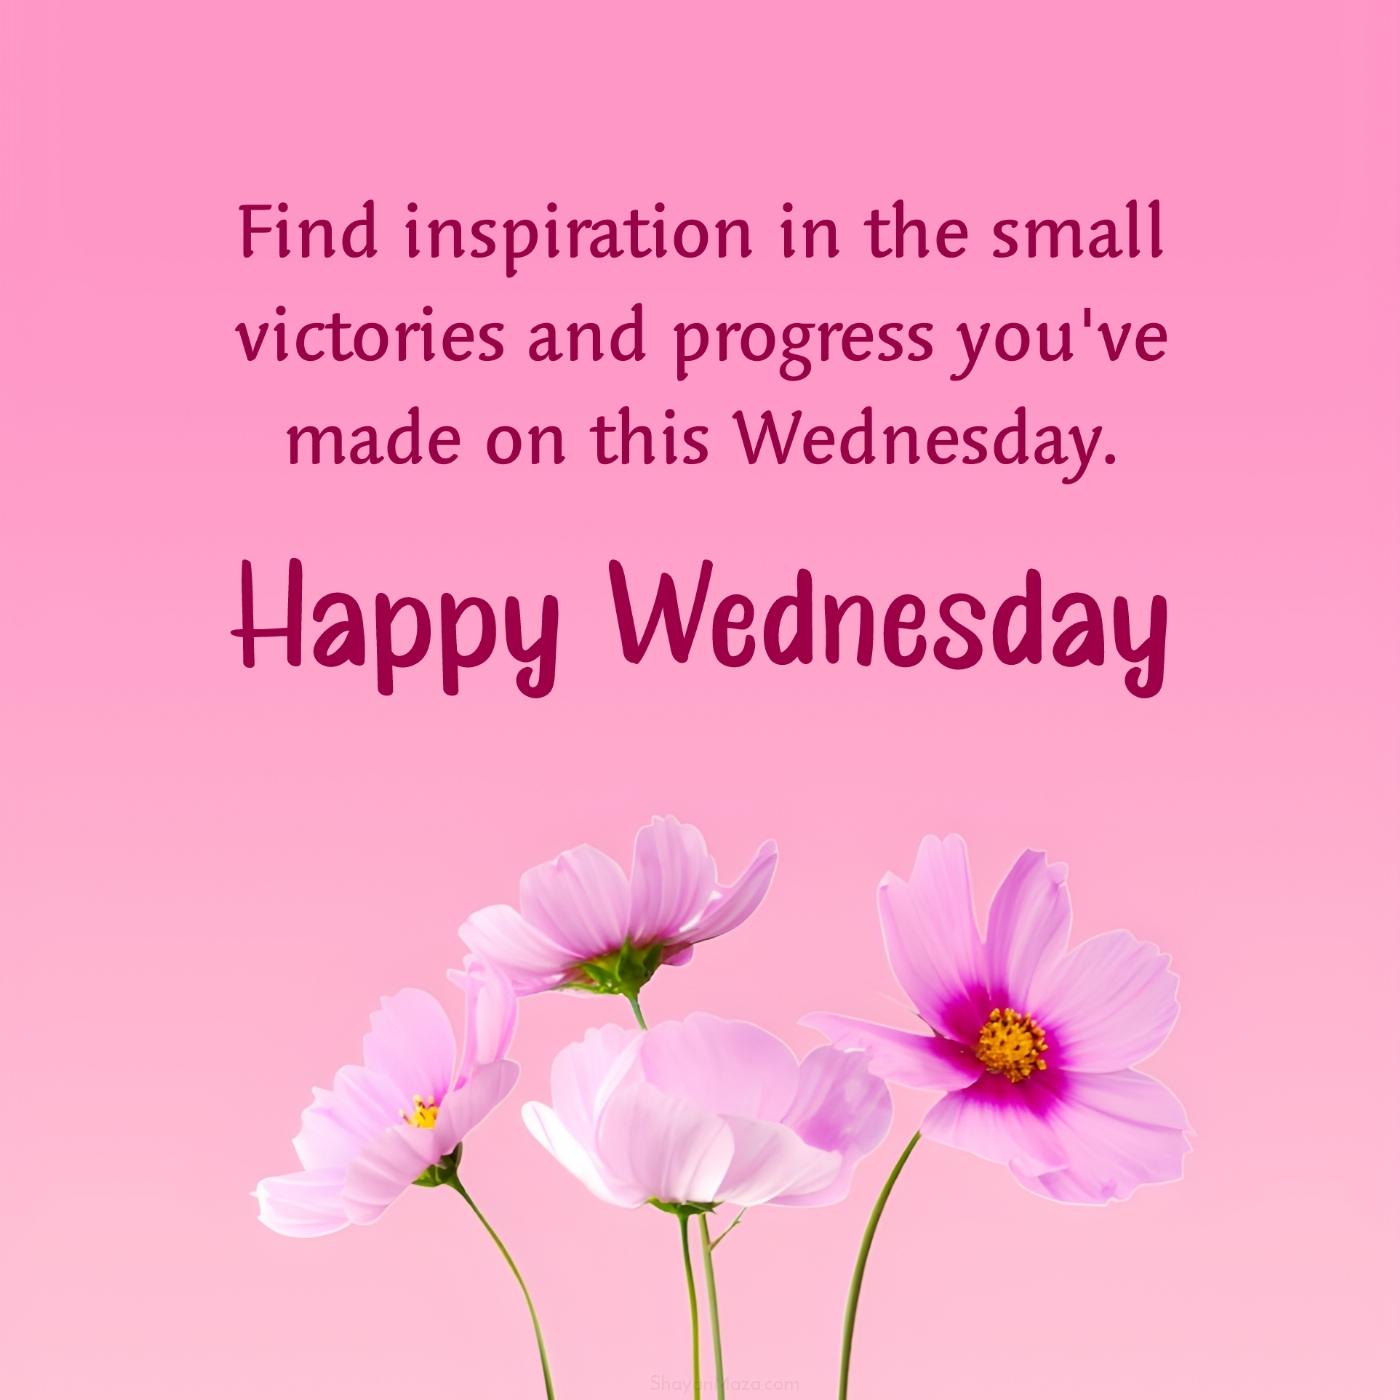 Find inspiration in the small victories and progress you've made on this Wednesday